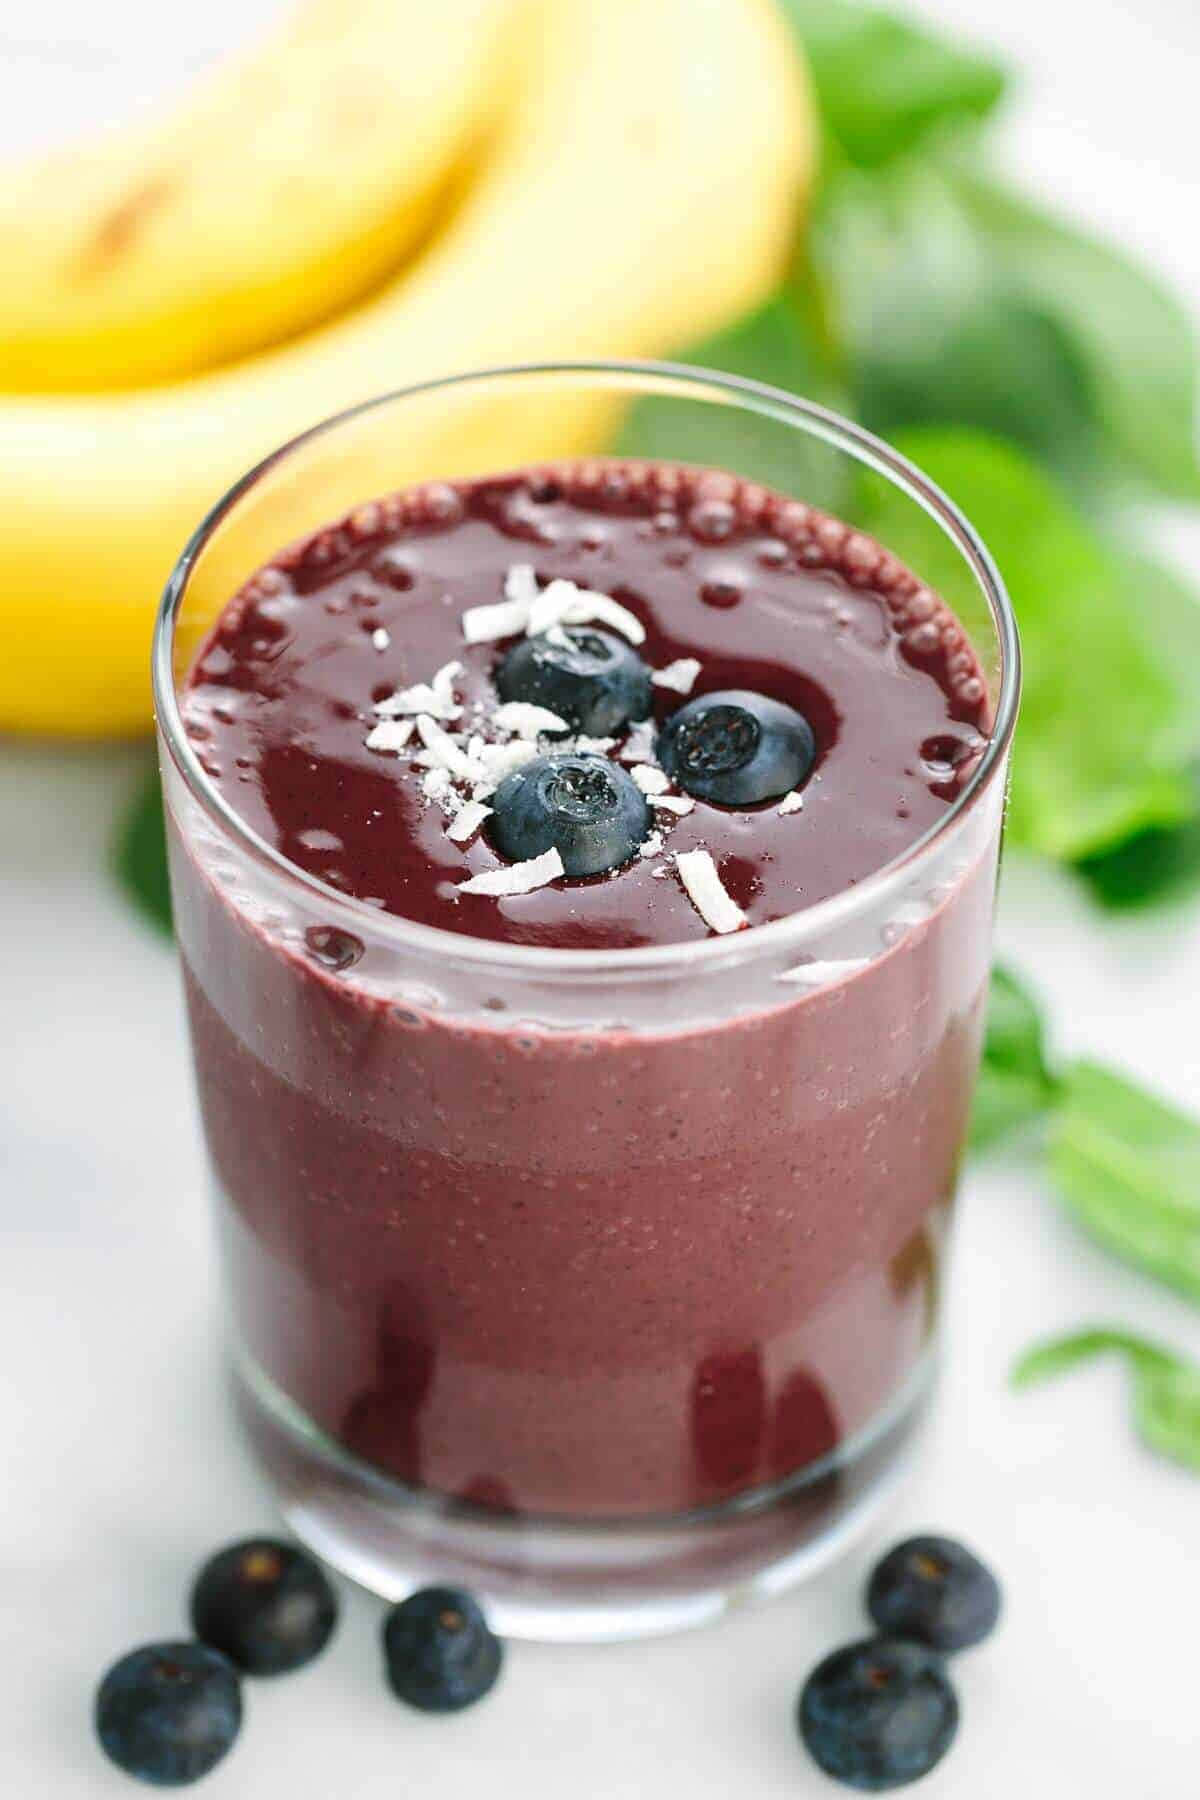 Start off your day with a delicious and nutritious blueberry smoothie! Wallpaper